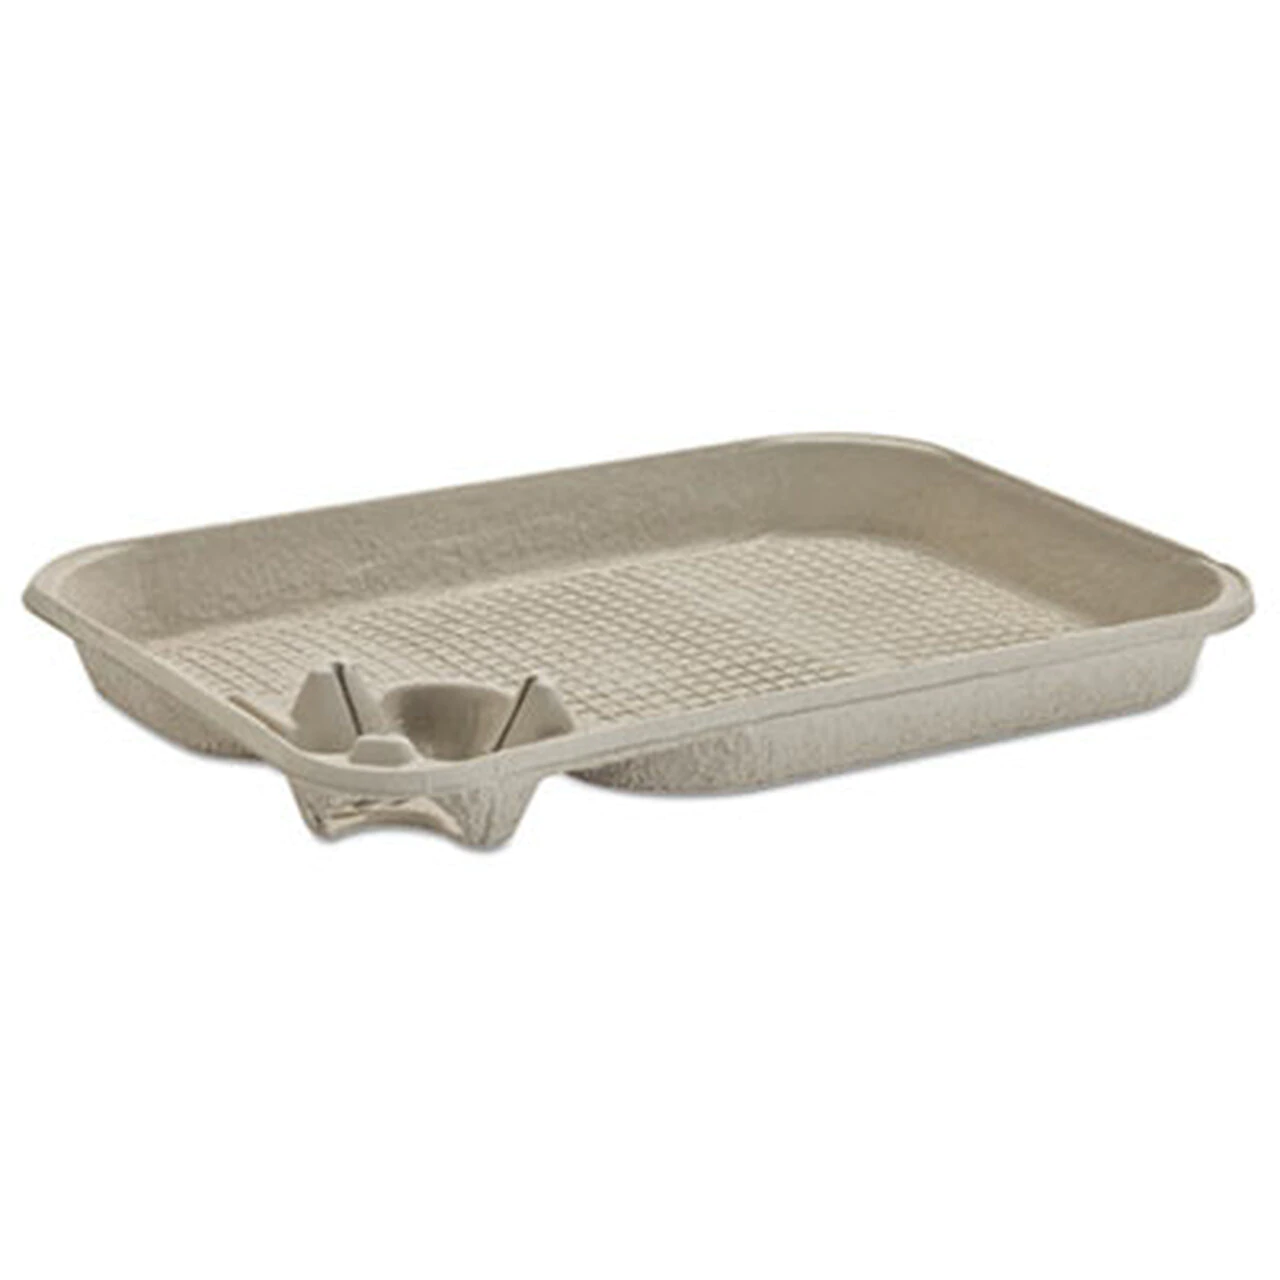 15-1/2&quot;X11&quot; (Crawfish Fish 
Tray) MOLDED FIBER FOOD
TRAY WITH CUP HOLDER, 200/CS